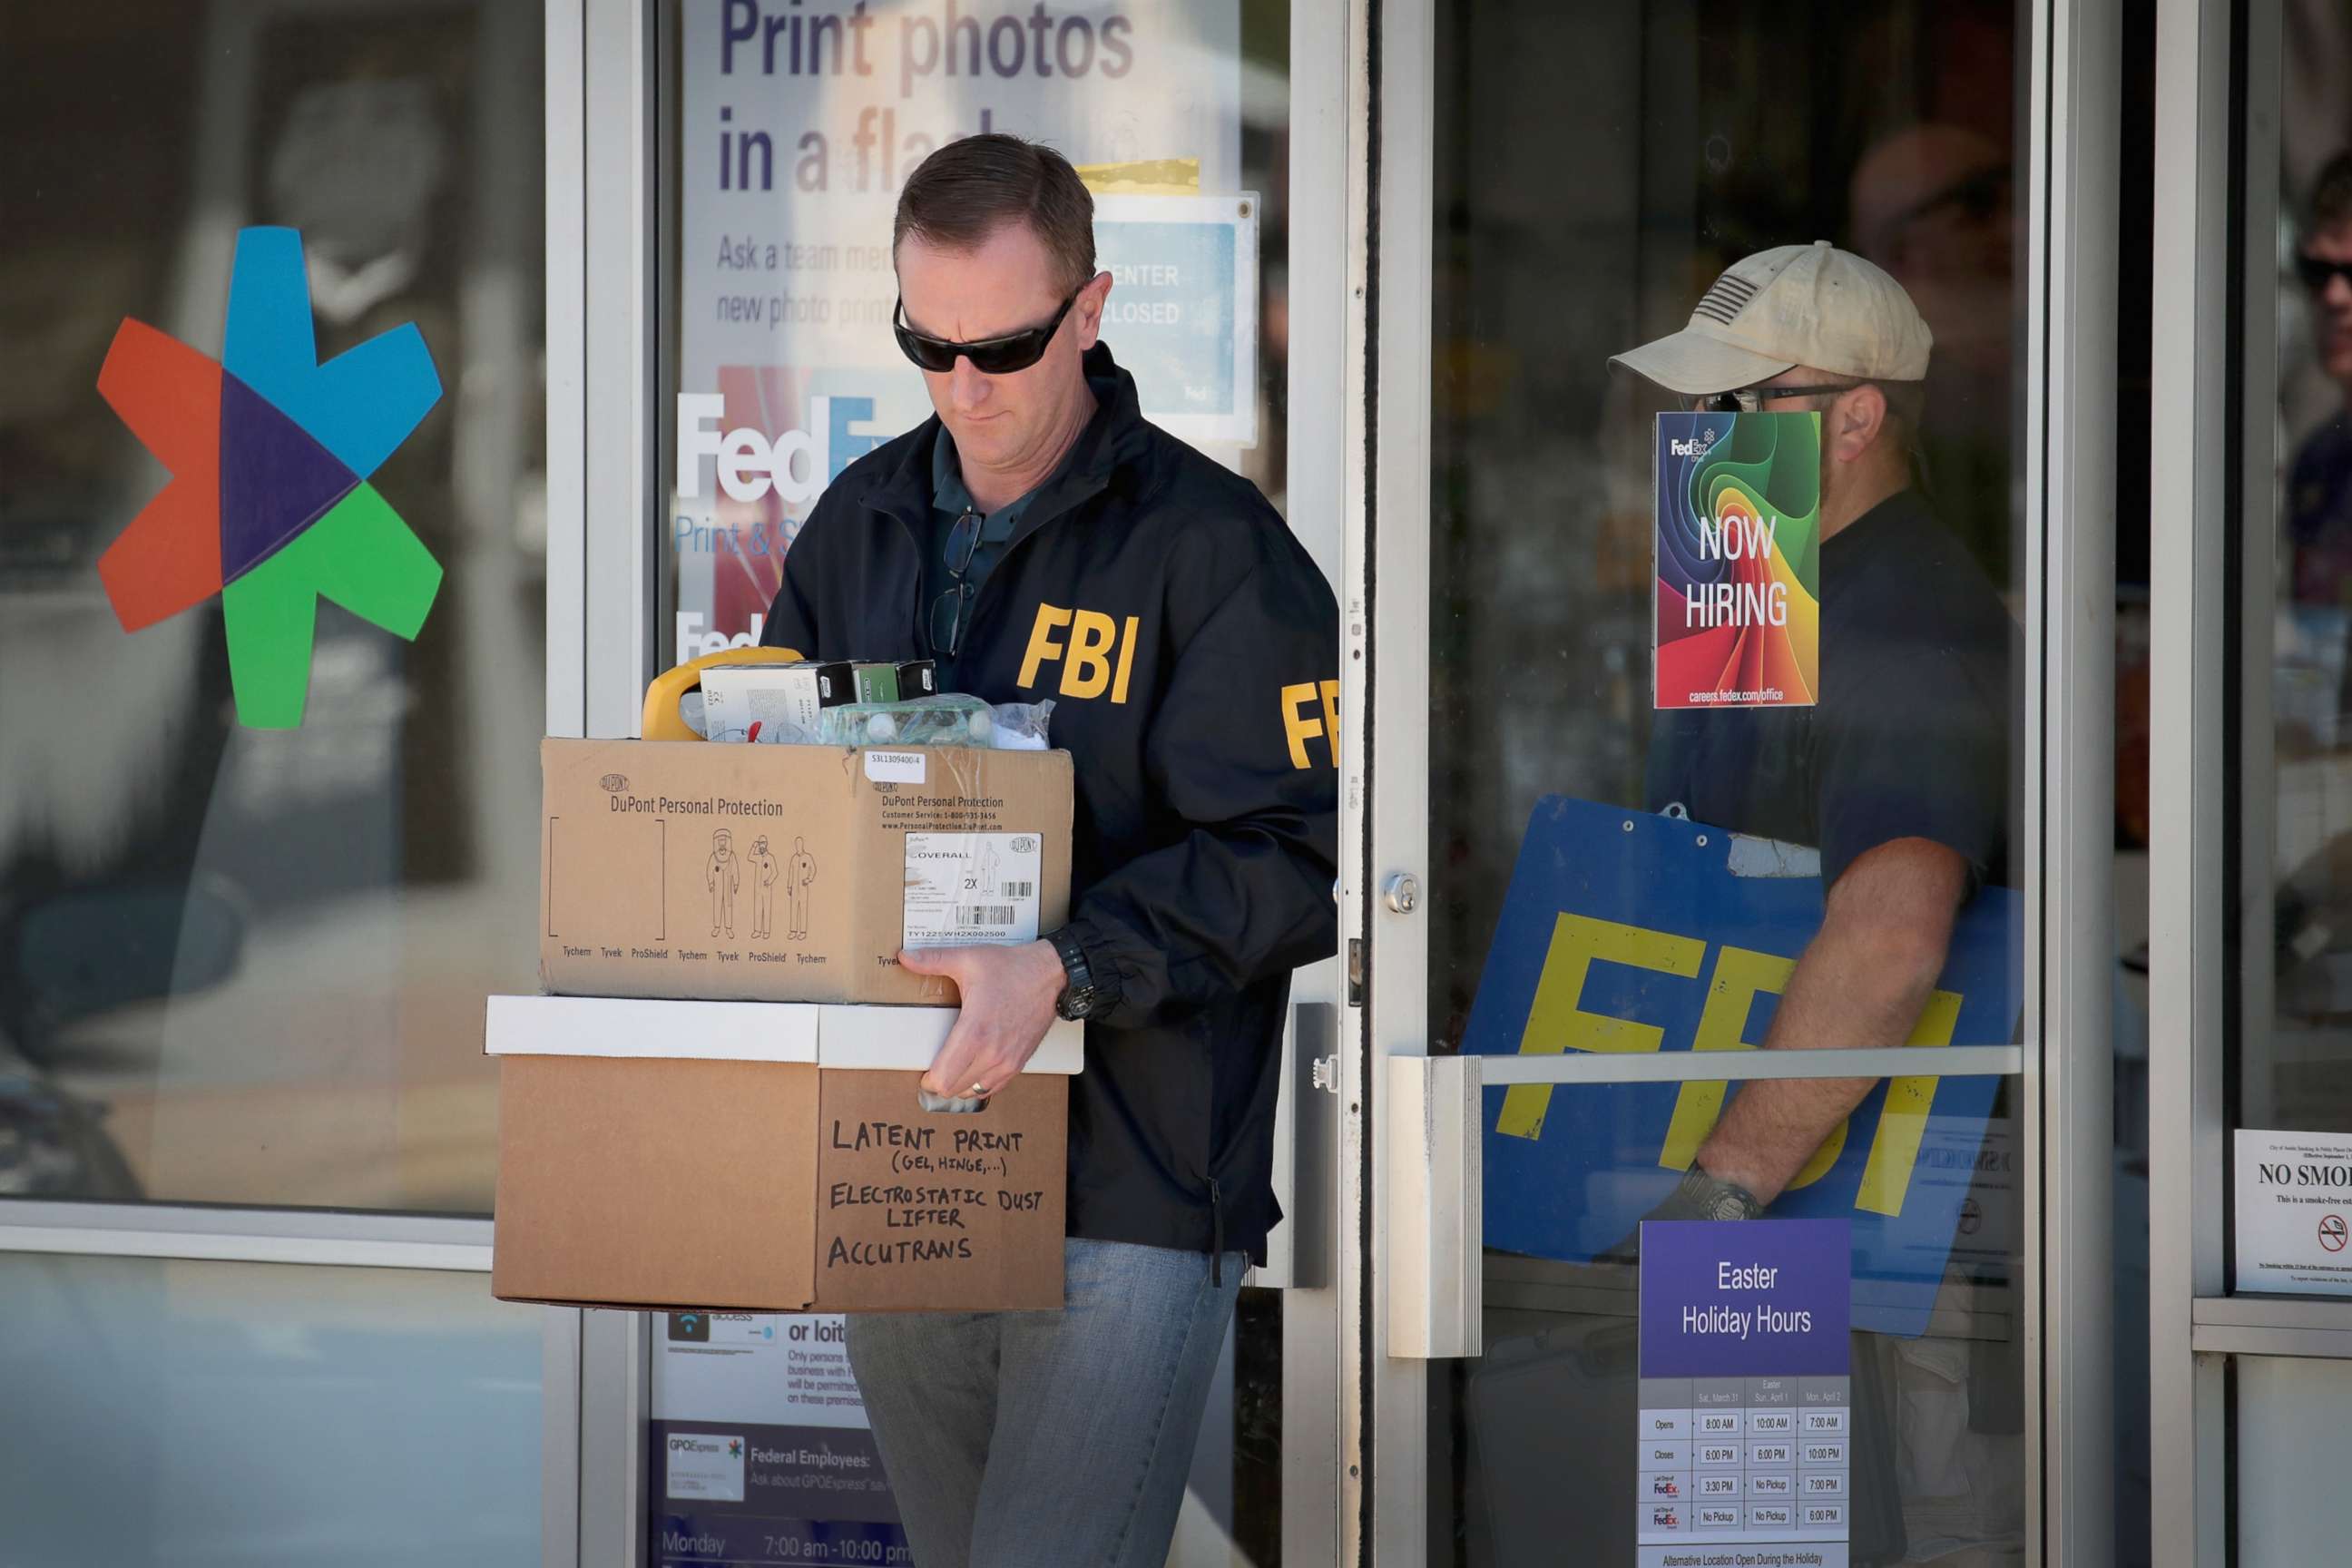 PHOTO: FBI agents collect evidence at a FedEx Office following an explosion at a nearby sorting center, March 20, 2018 in Sunset Valley, Texas. A package, reported to have been shipped from this store, exploded at a sorting facility in Schertz, Texas.